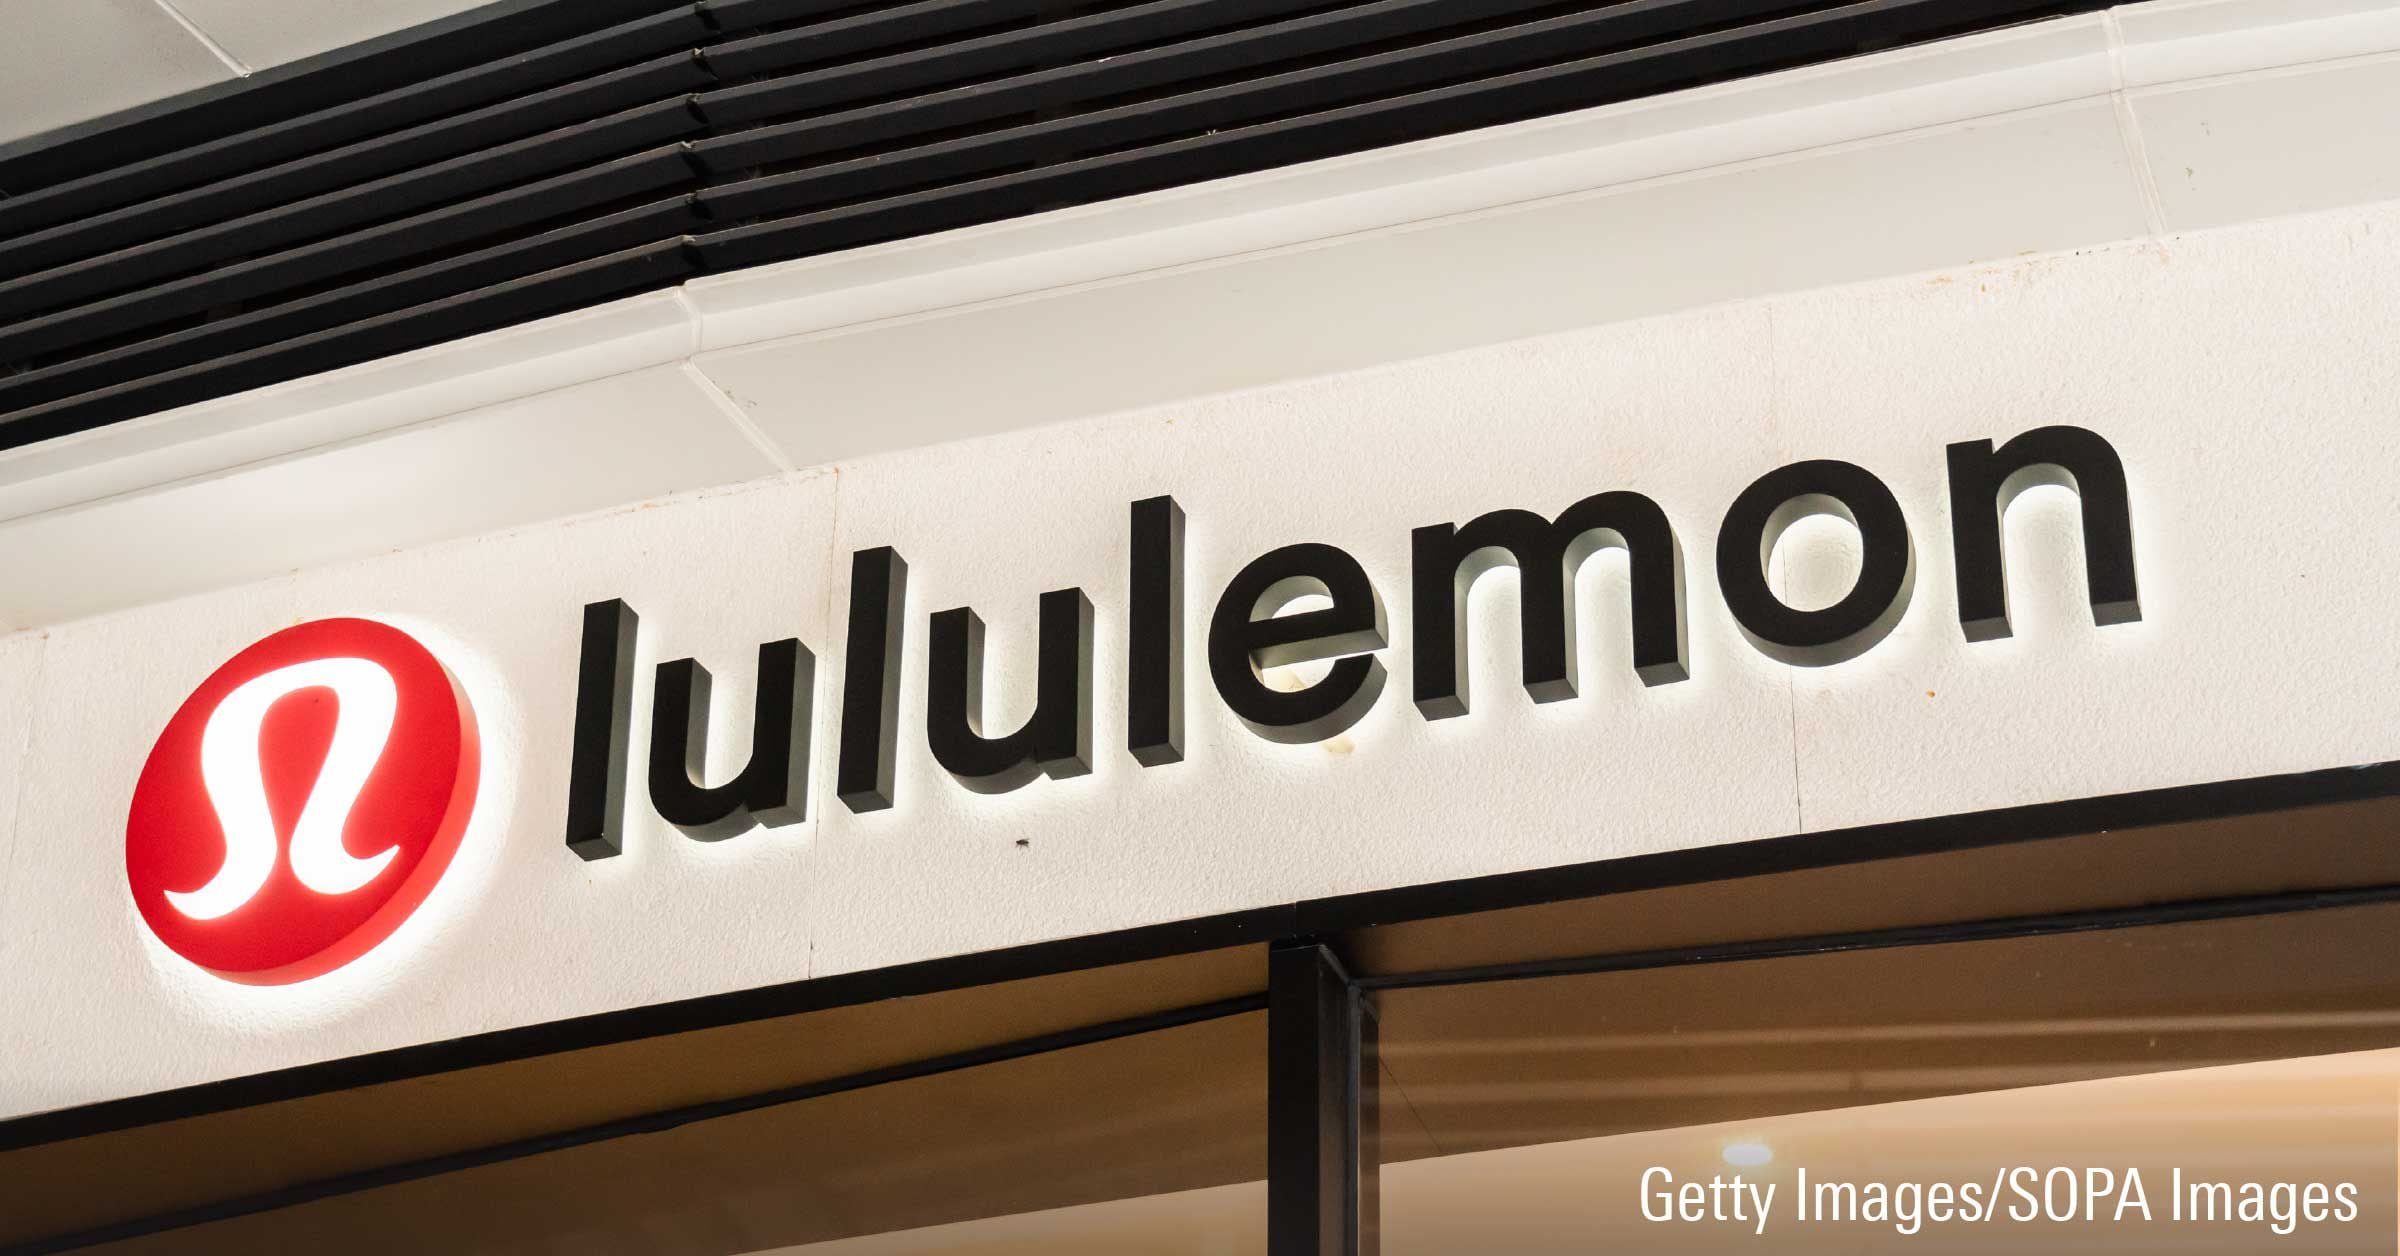 What is Lululemon's marketing Strategy for the United States?